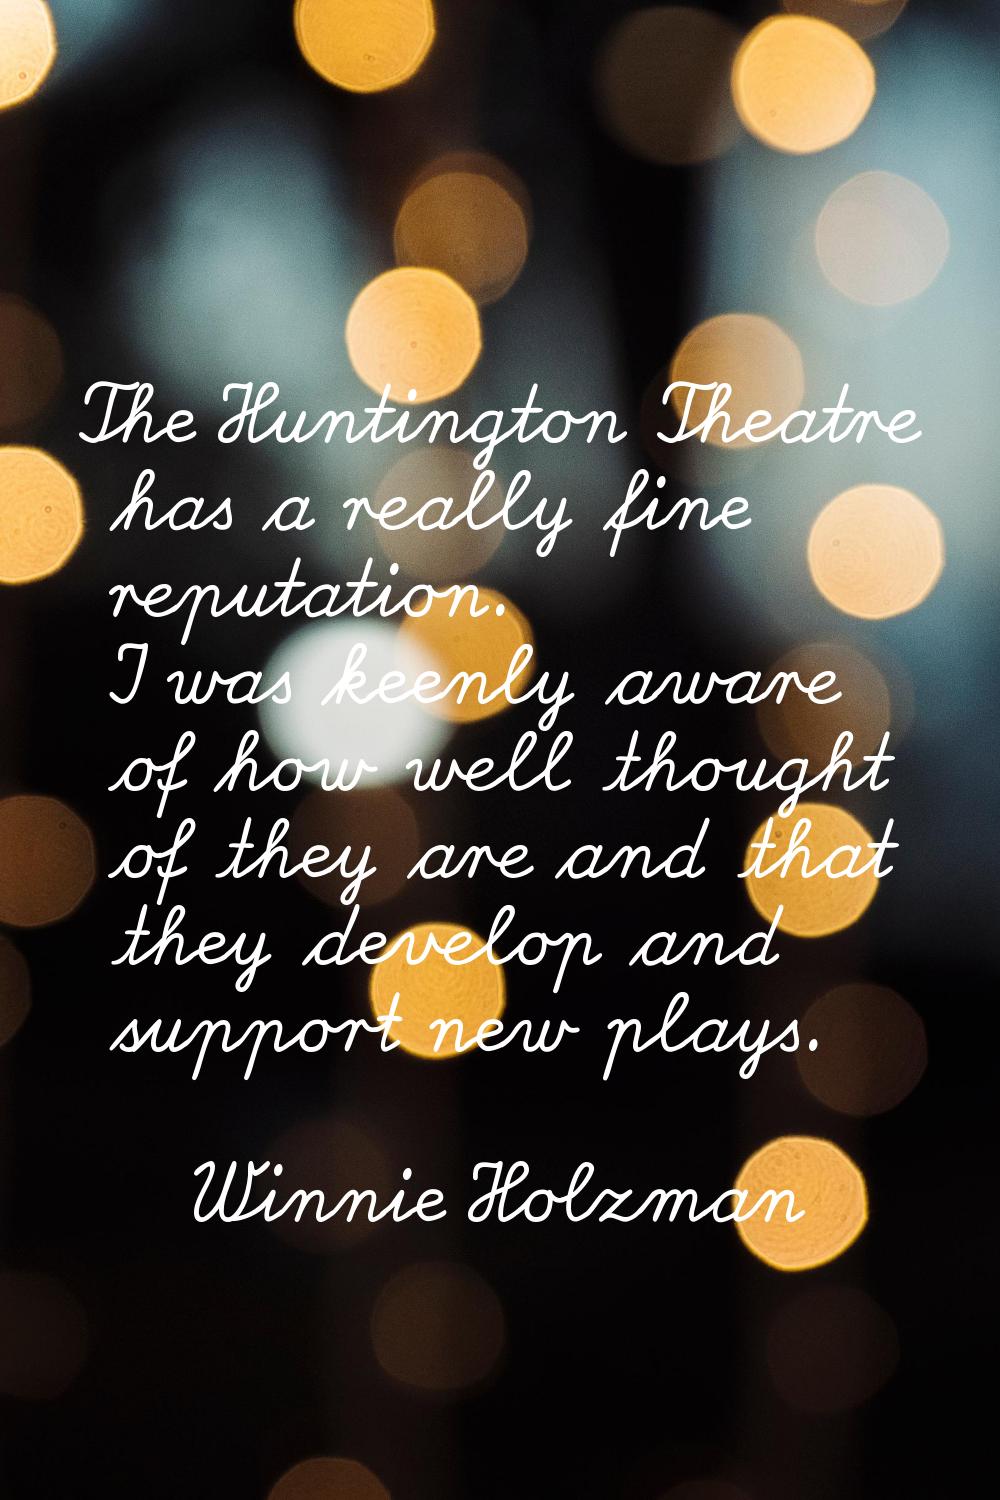 The Huntington Theatre has a really fine reputation. I was keenly aware of how well thought of they